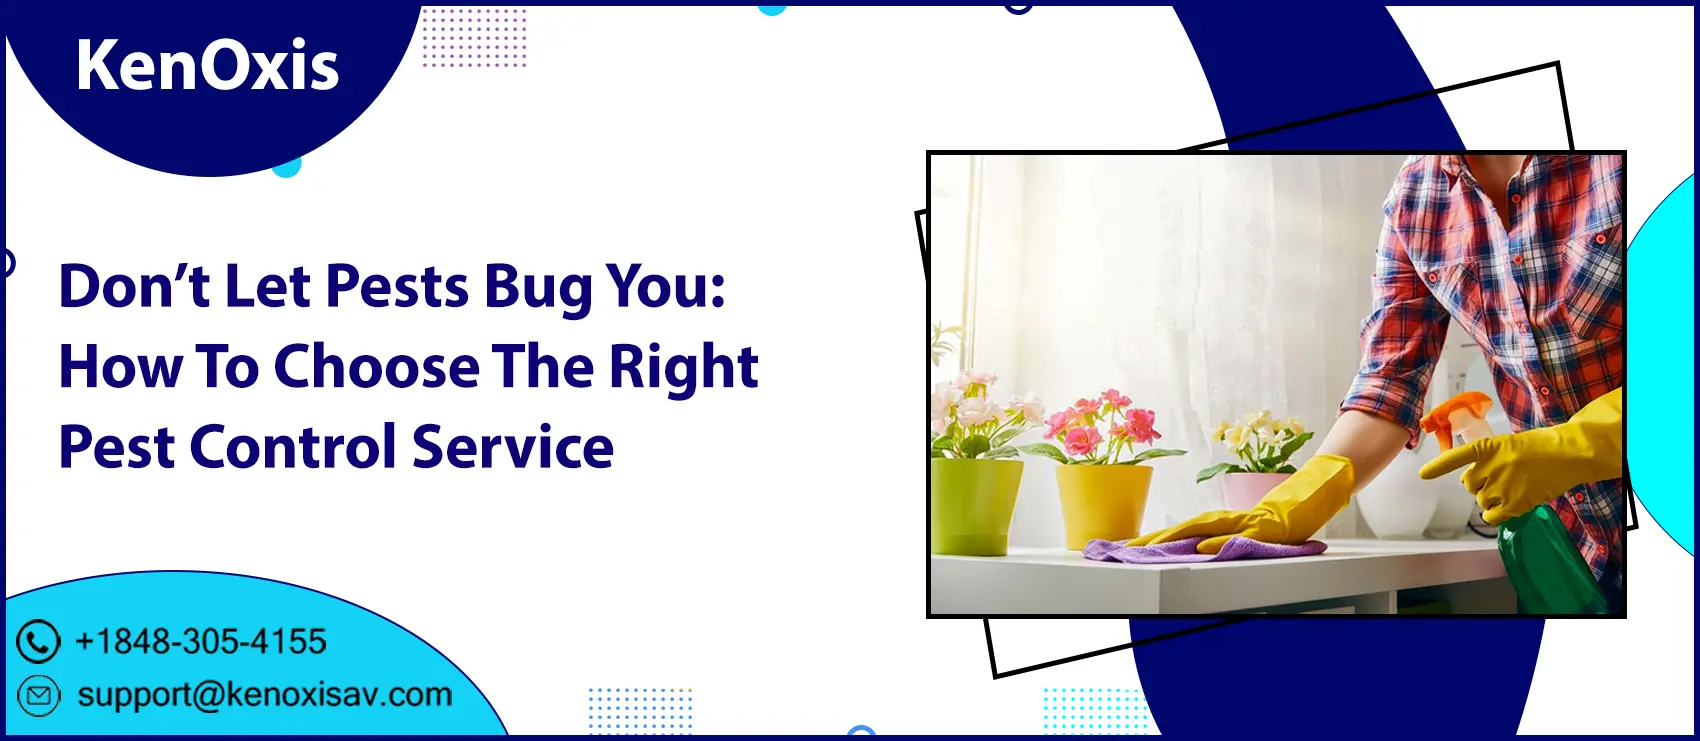 Don’t Let Pests Bug You: How To Choose The Right Pest Control Service